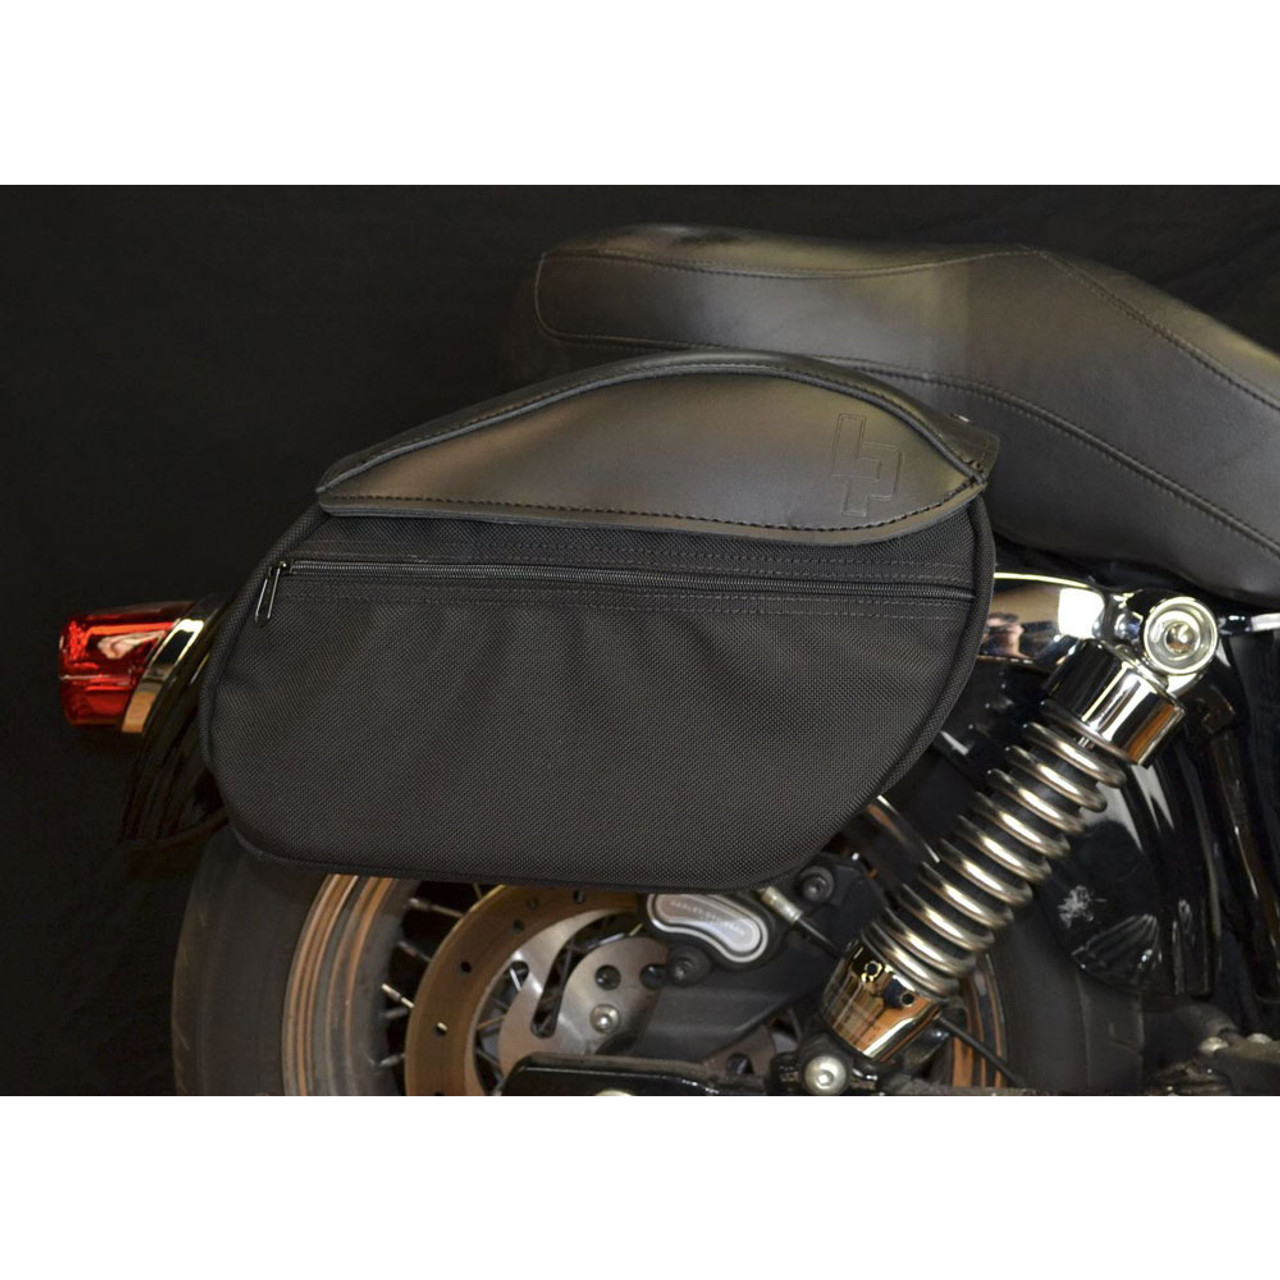 Leather Pros Retro Mini Saddlebags for Harley Dyna | Get Lowered Cycles